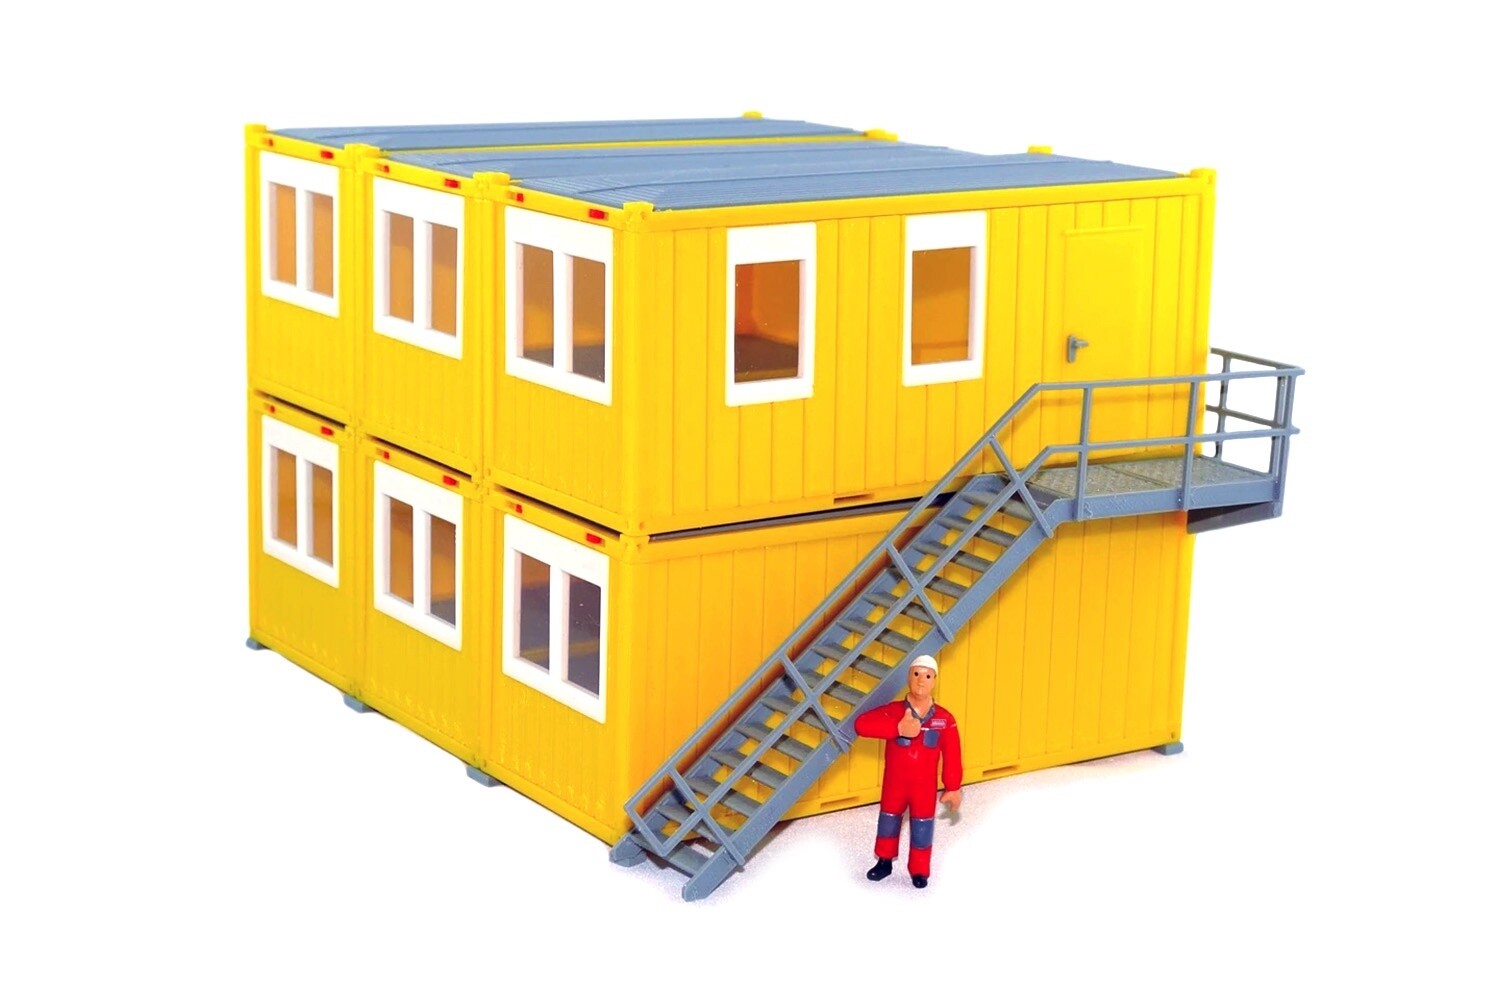 Six Containers Stacked - Set E - Yellow